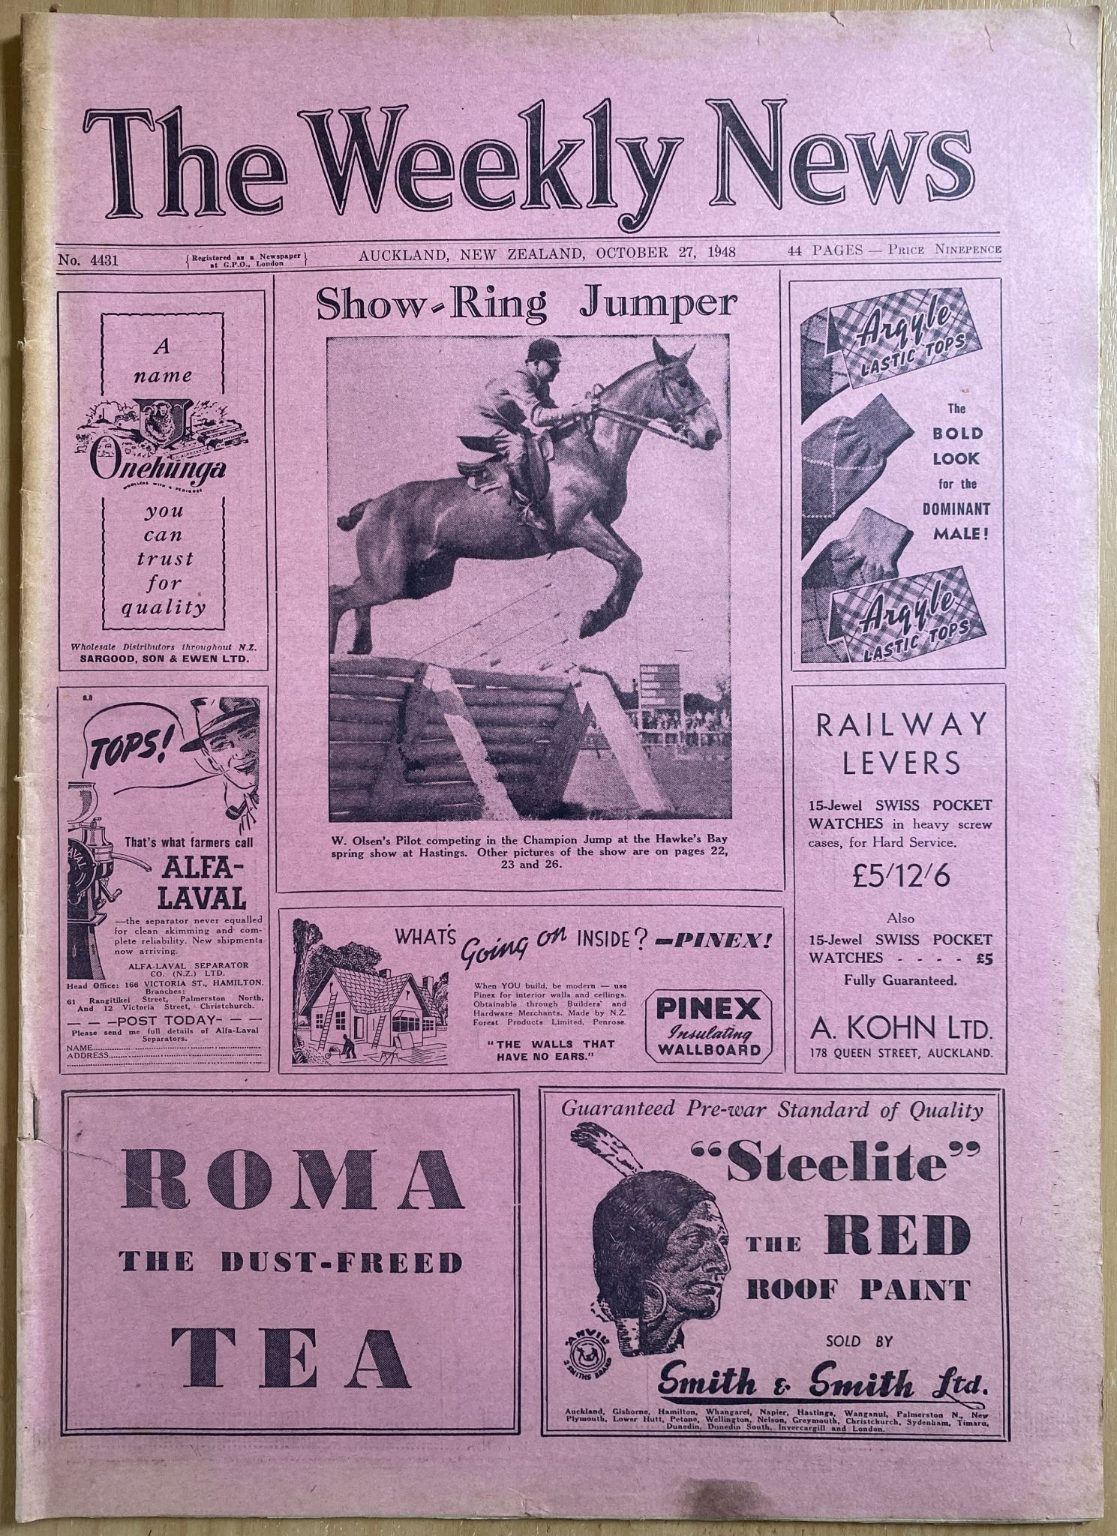 OLD NEWSPAPER: The Weekly News - No. 4431, 27 October 1948